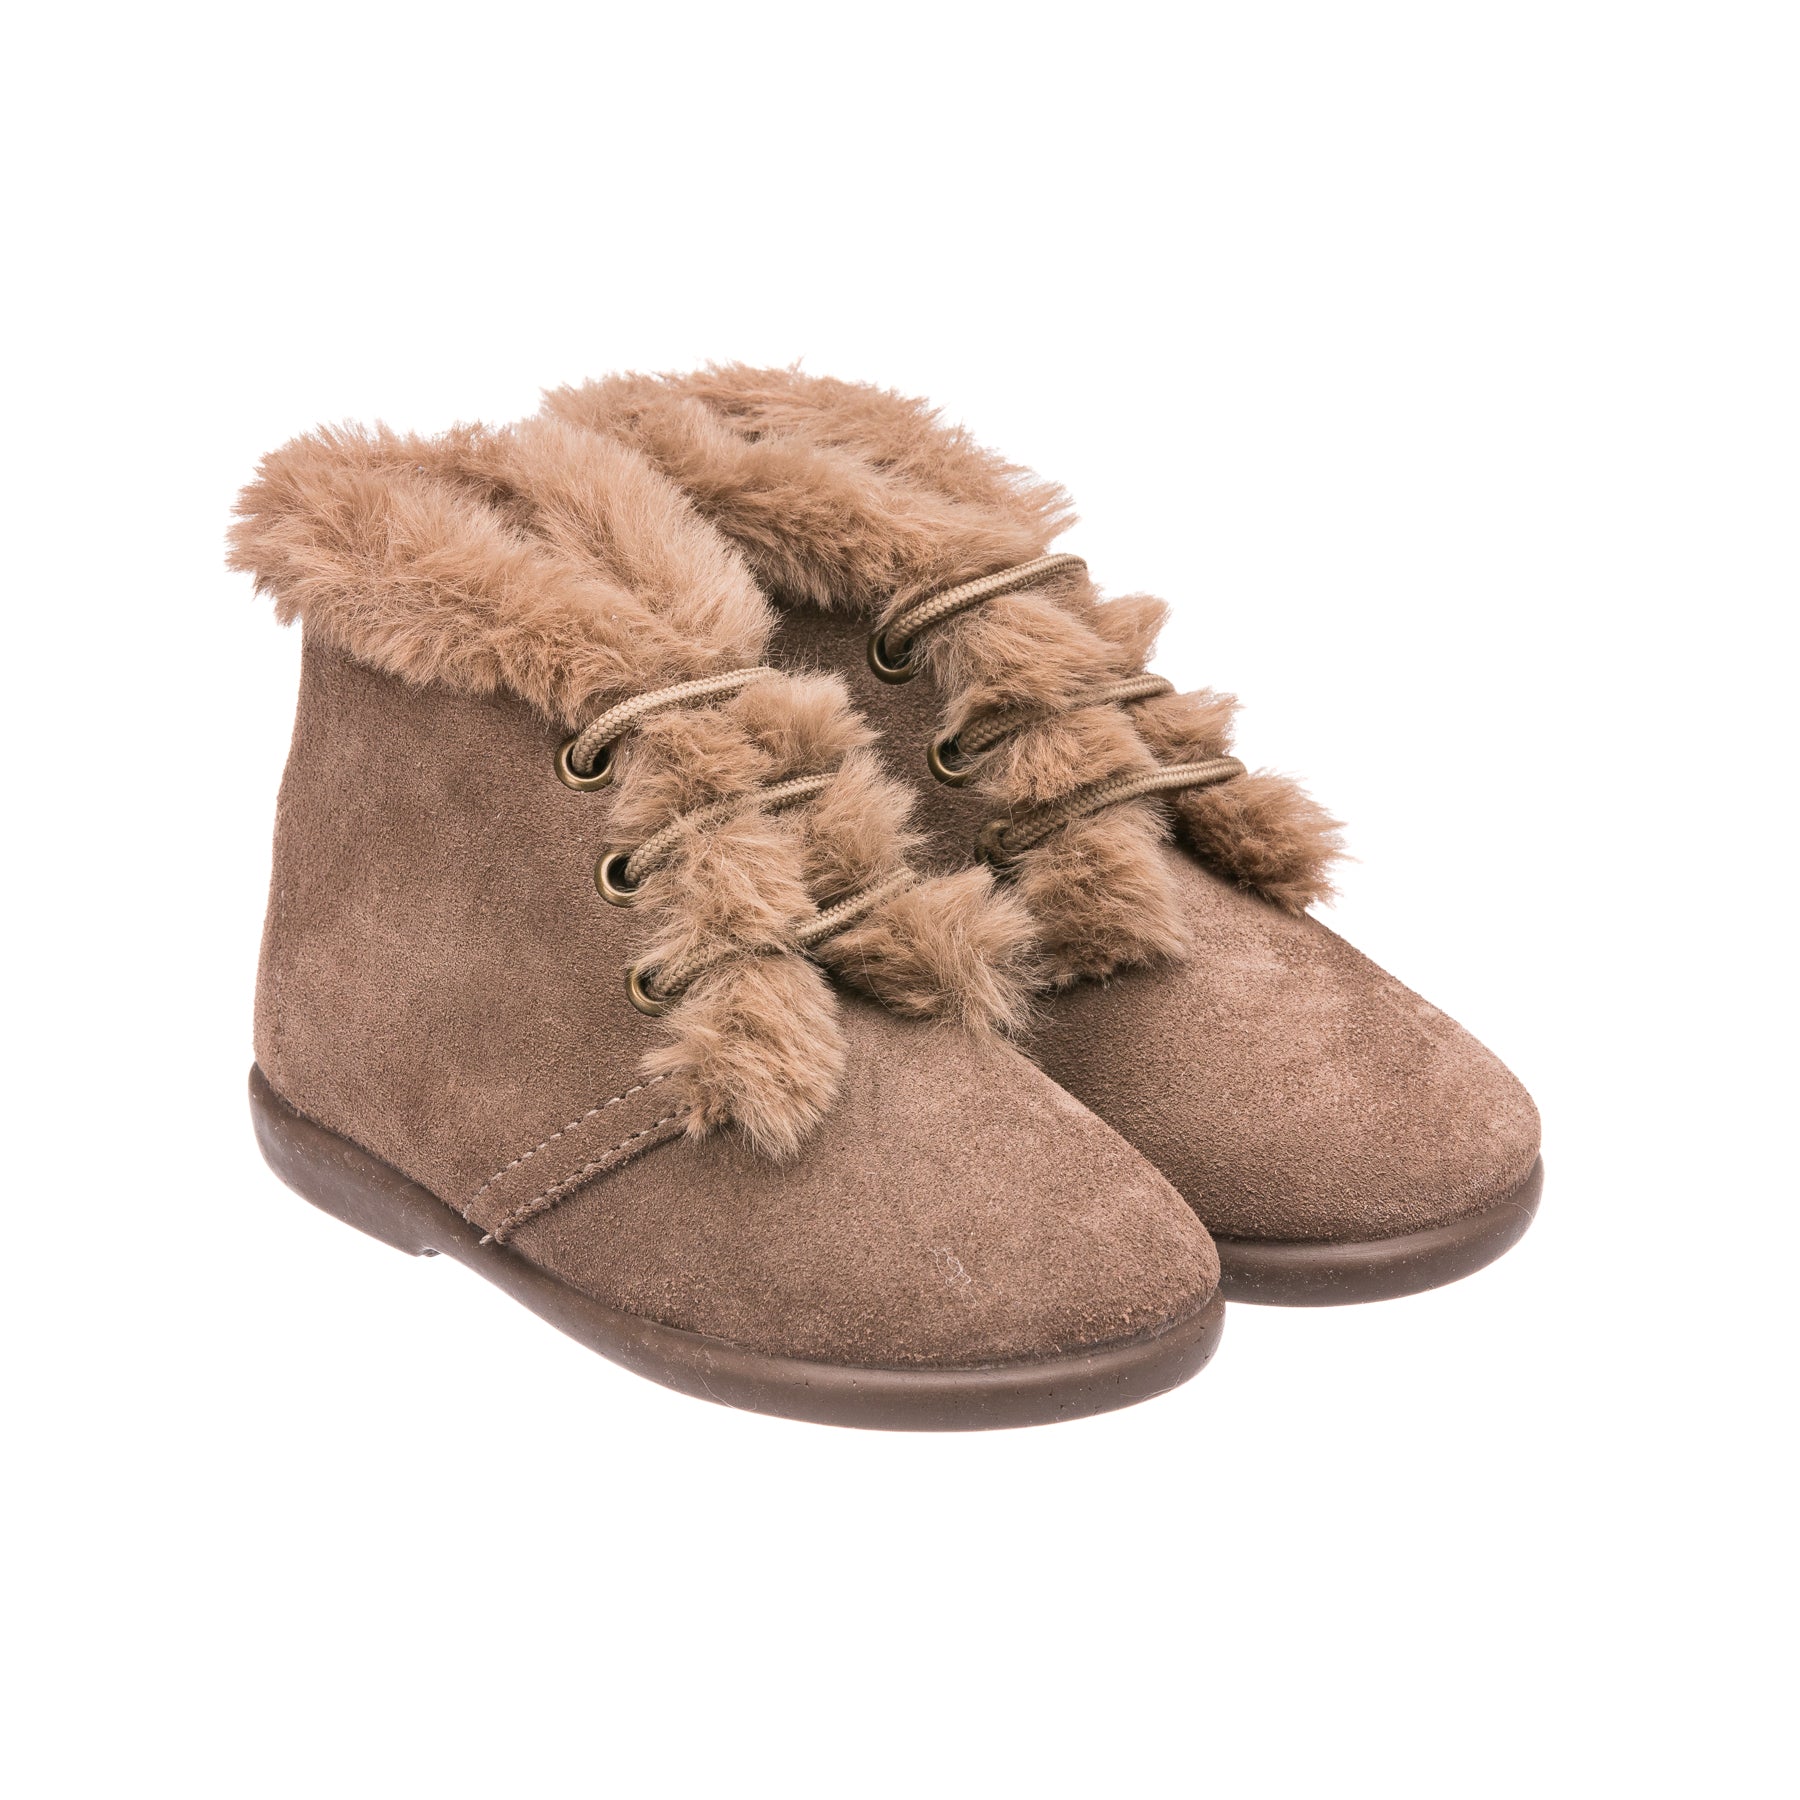 Teddy shearling ankle boots